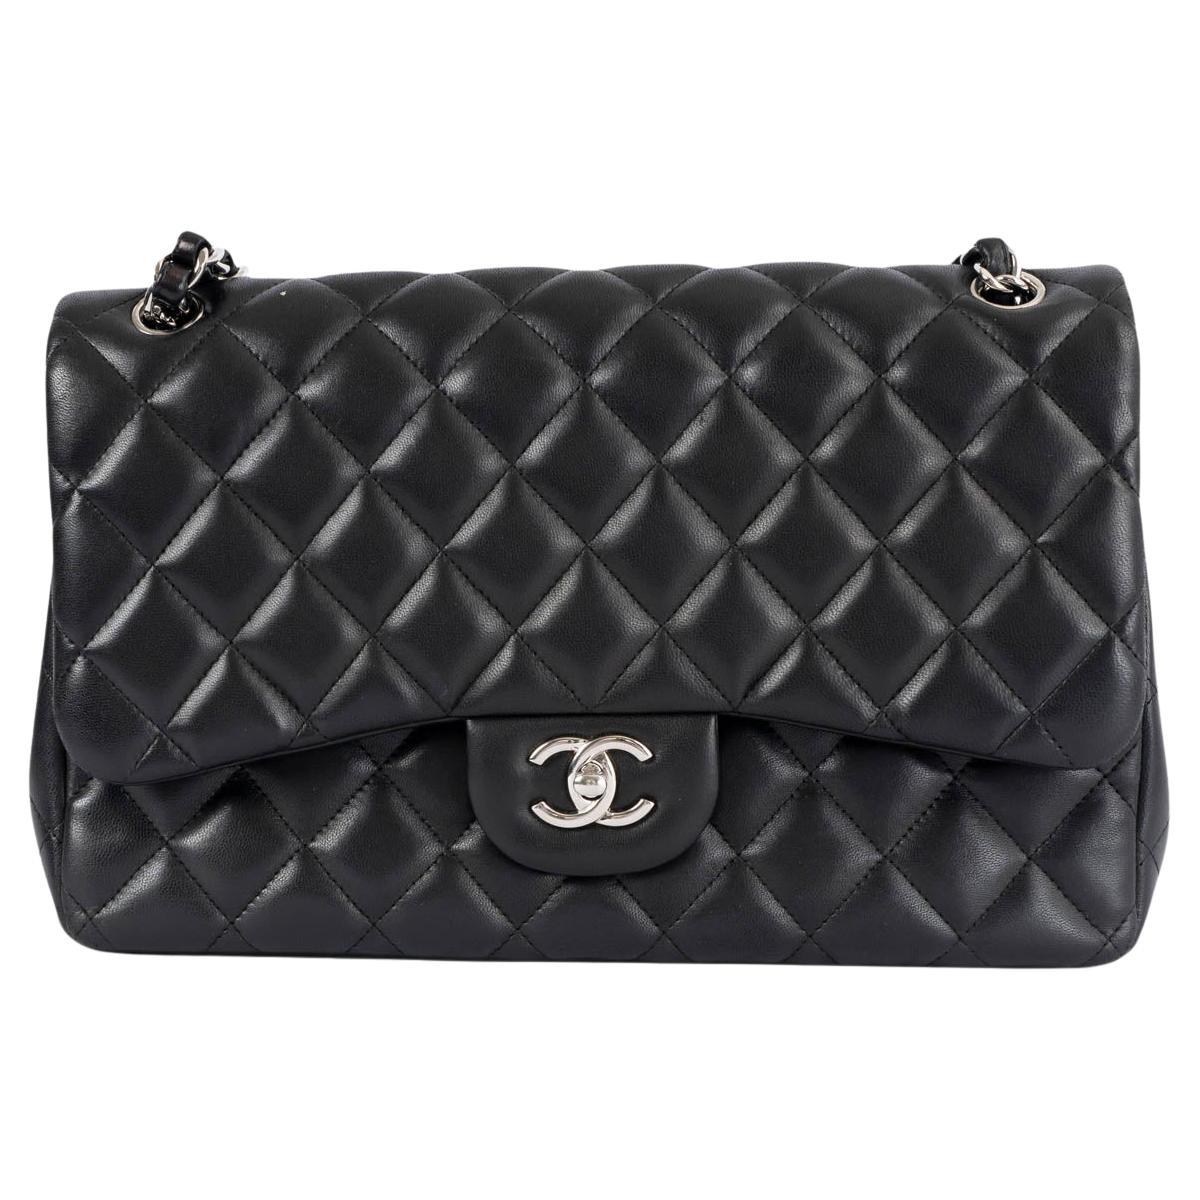 CHANEL black quilted lambskin leather TIMELESS CLASSIC LARGE Flap Shoulder Bag For Sale